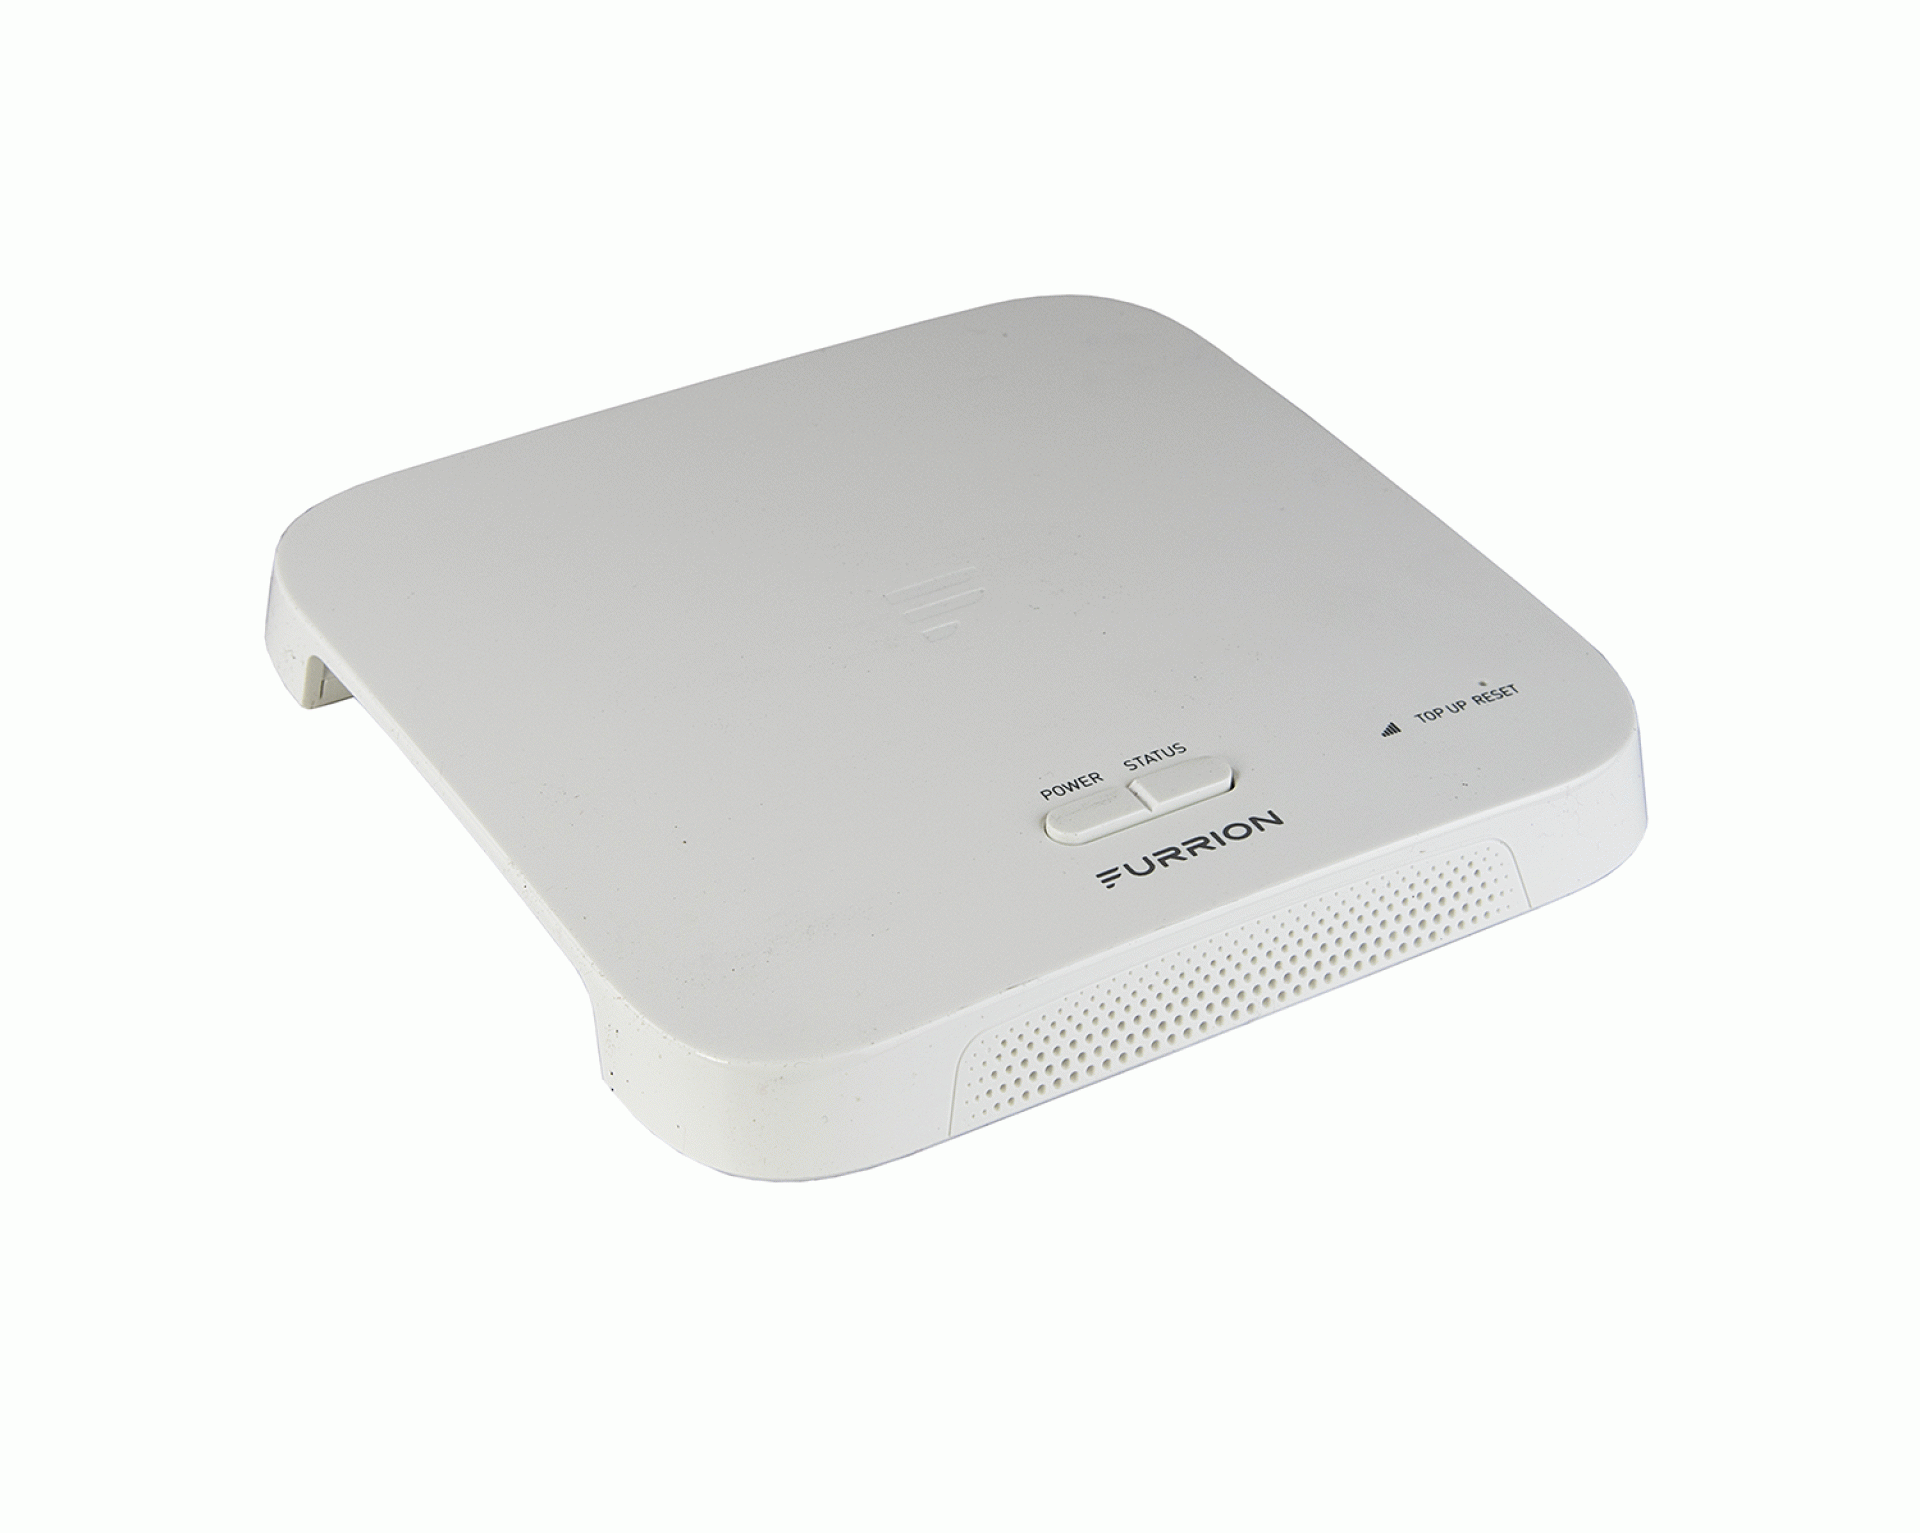 FURRION LLC | 2021123819 | 4G LTE ACCESS POINT AND WIFI ROUTER WITH CEILING MOUNT BRACKET FAN17B83